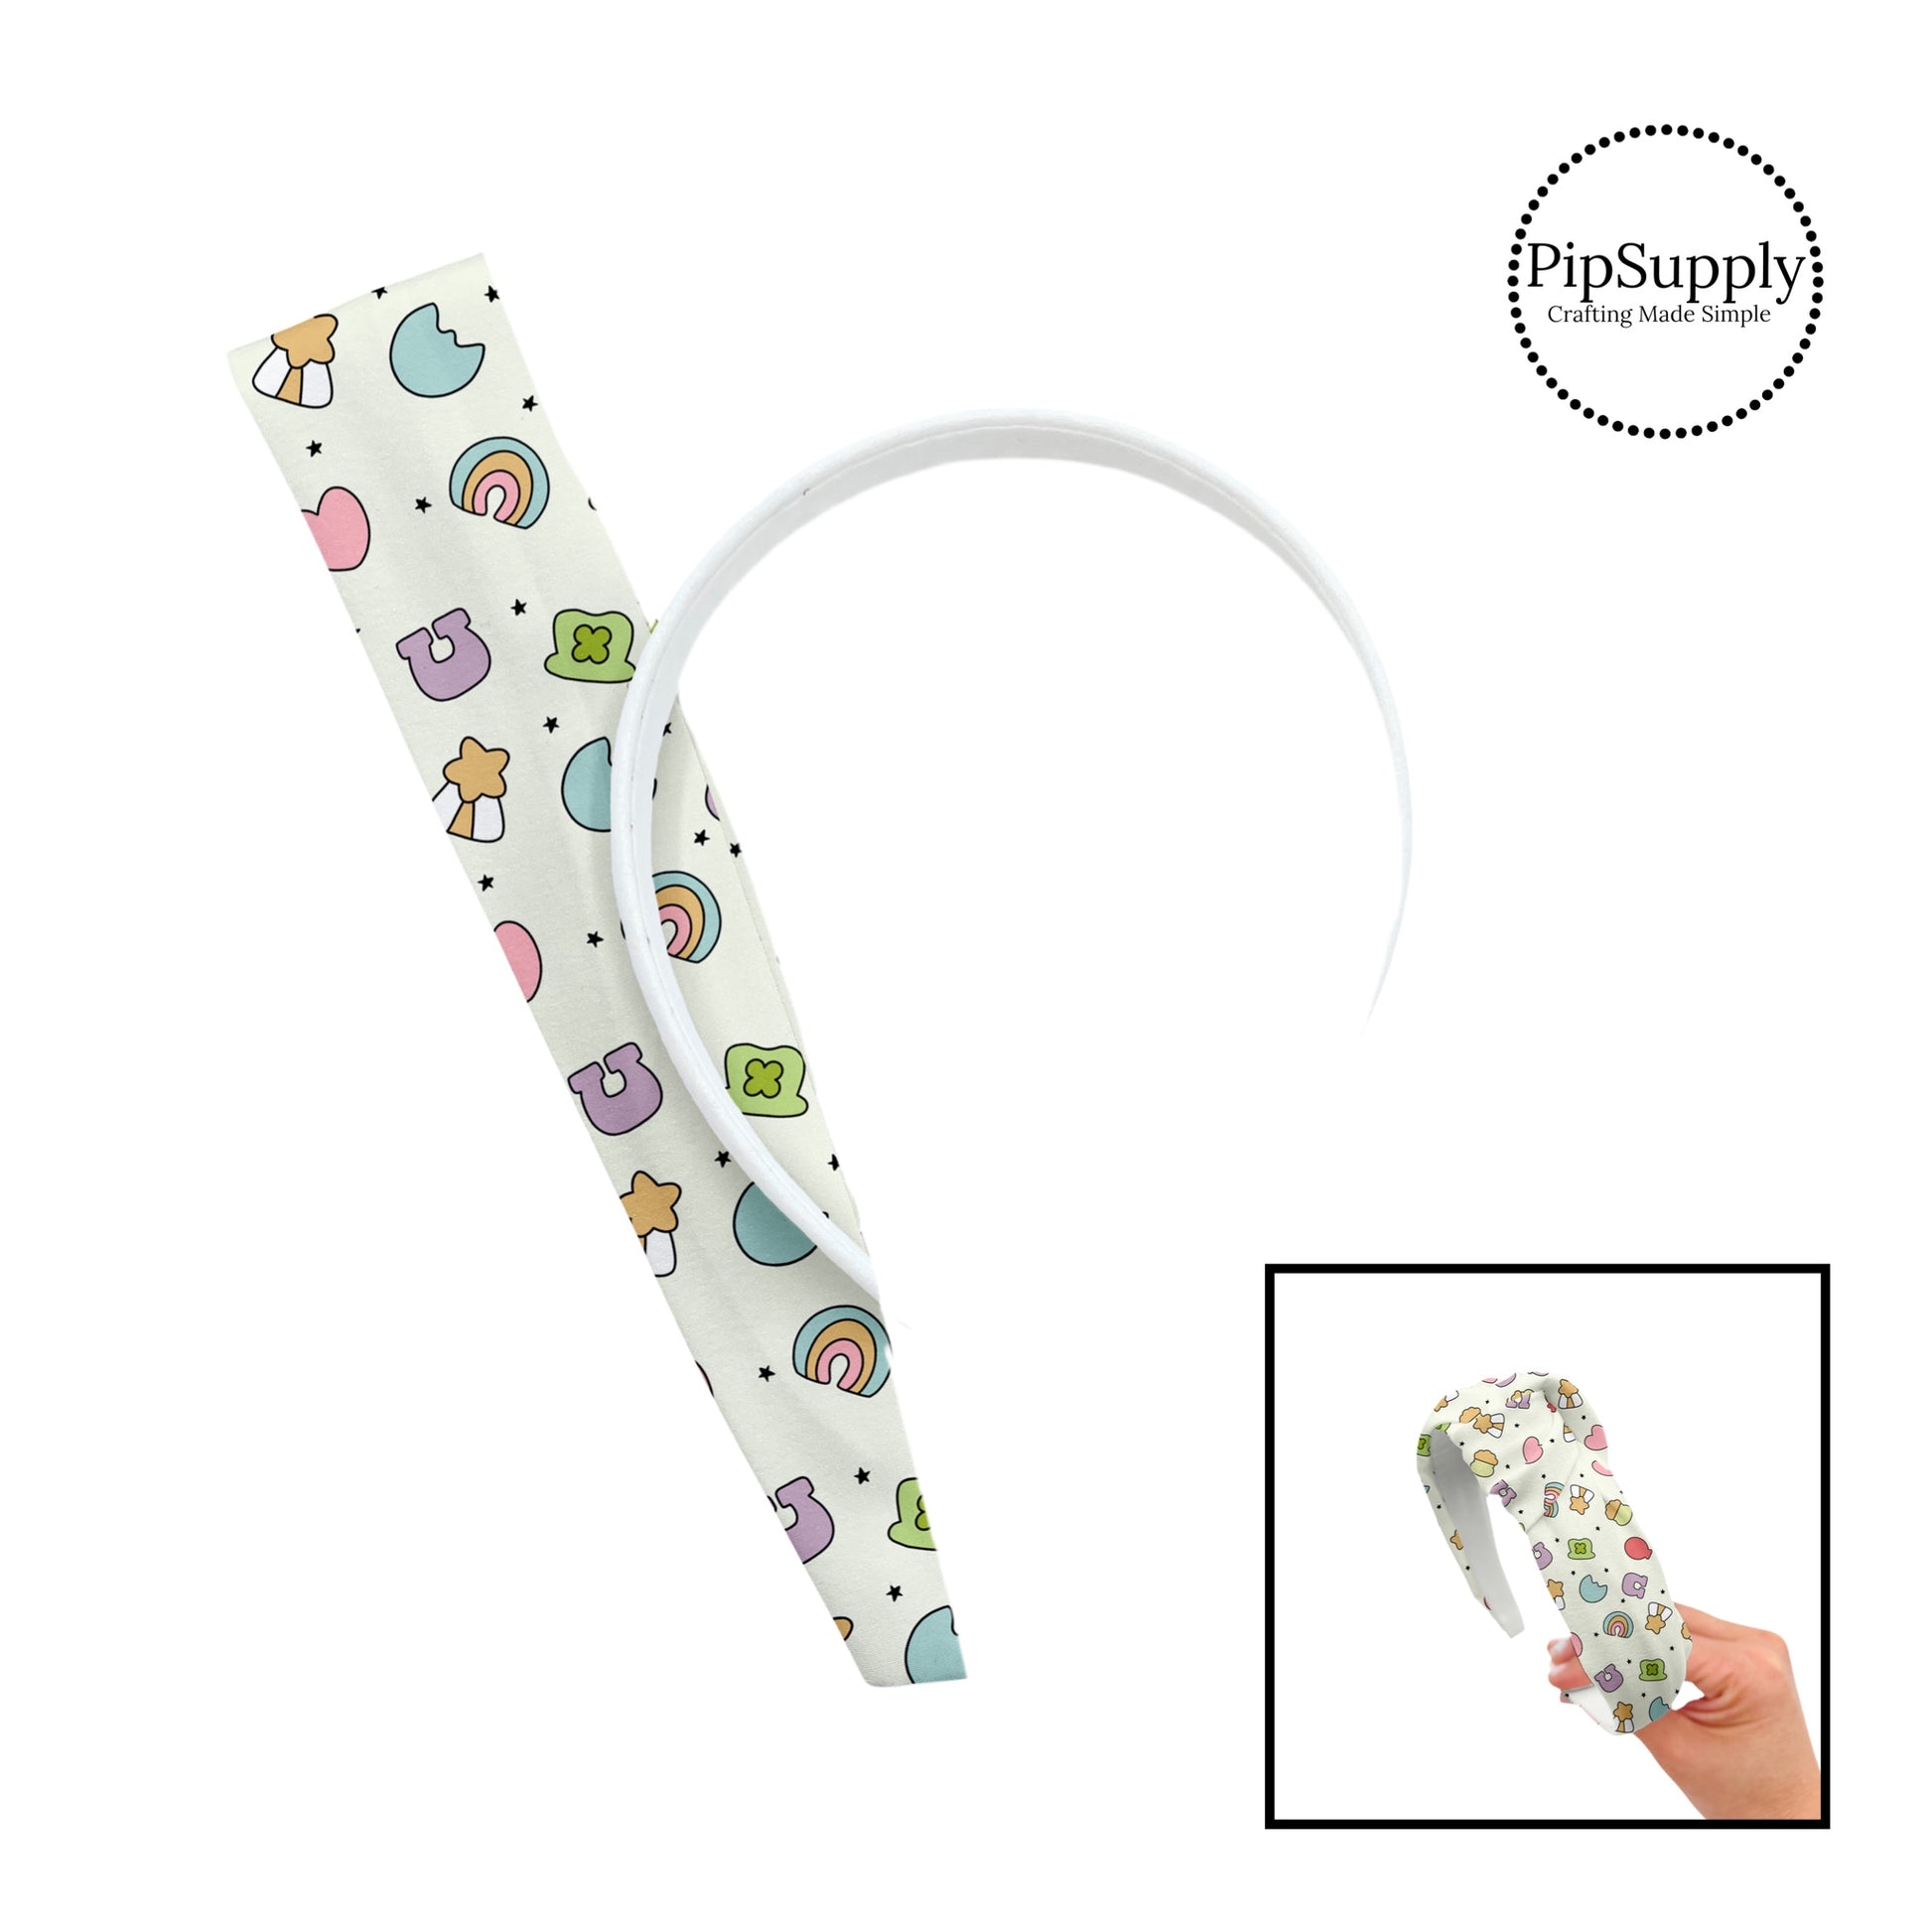 These patterned headband kits are easy to assemble and come with everything you need to make your own knotted headband. These St. Patrick's Day kits include a custom printed and sewn fabric strip and a coordinating velvet headband. This cute pattern features lucky charms. 